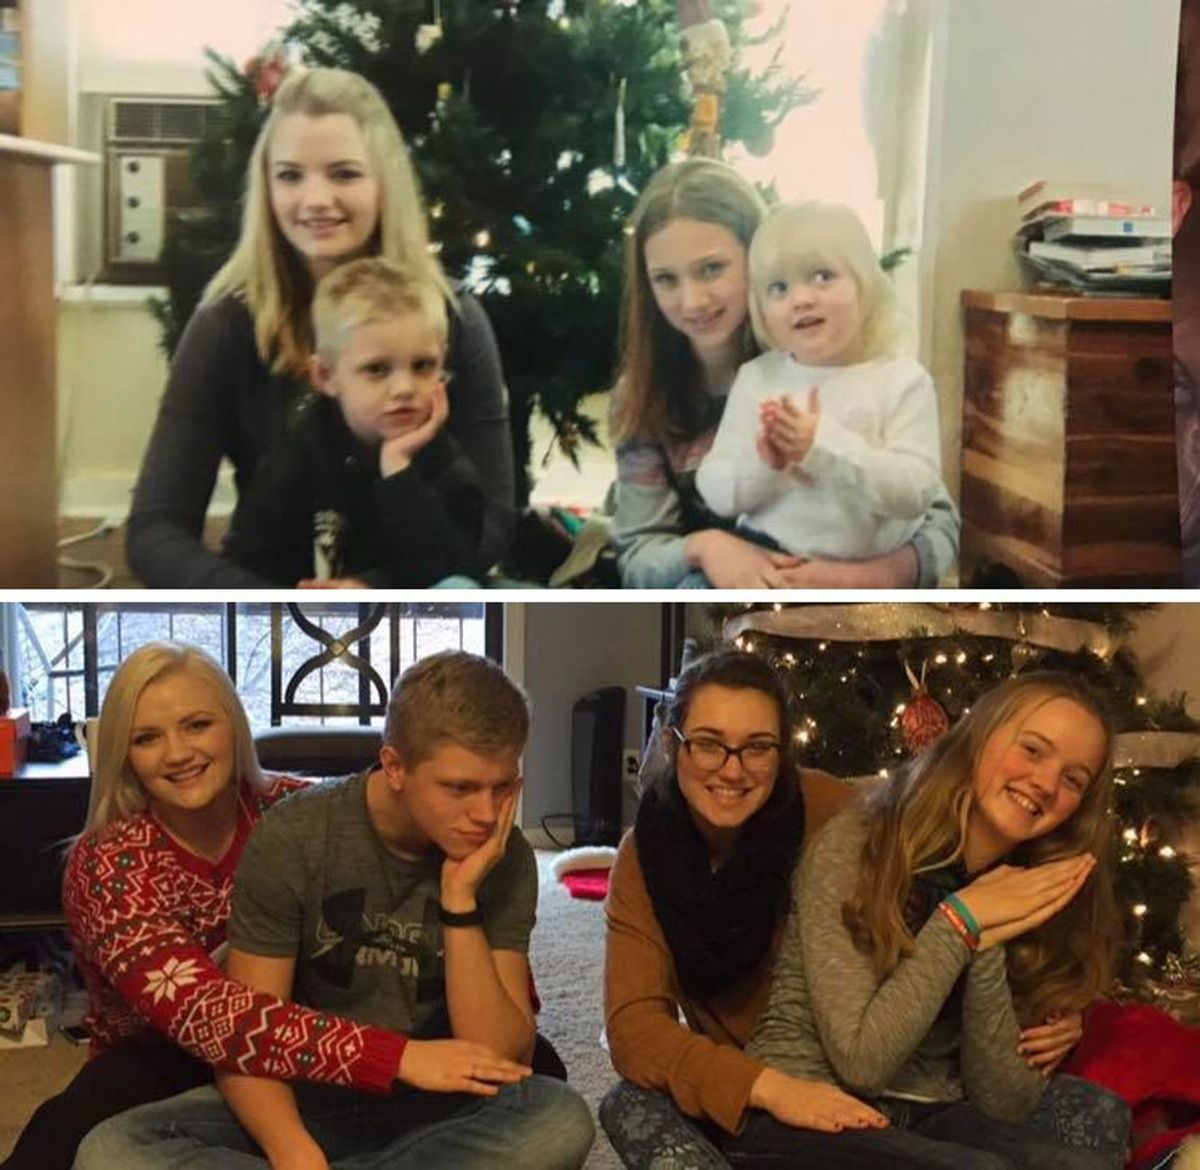 12 Ways The Holidays Change When You're A "Grown Up"